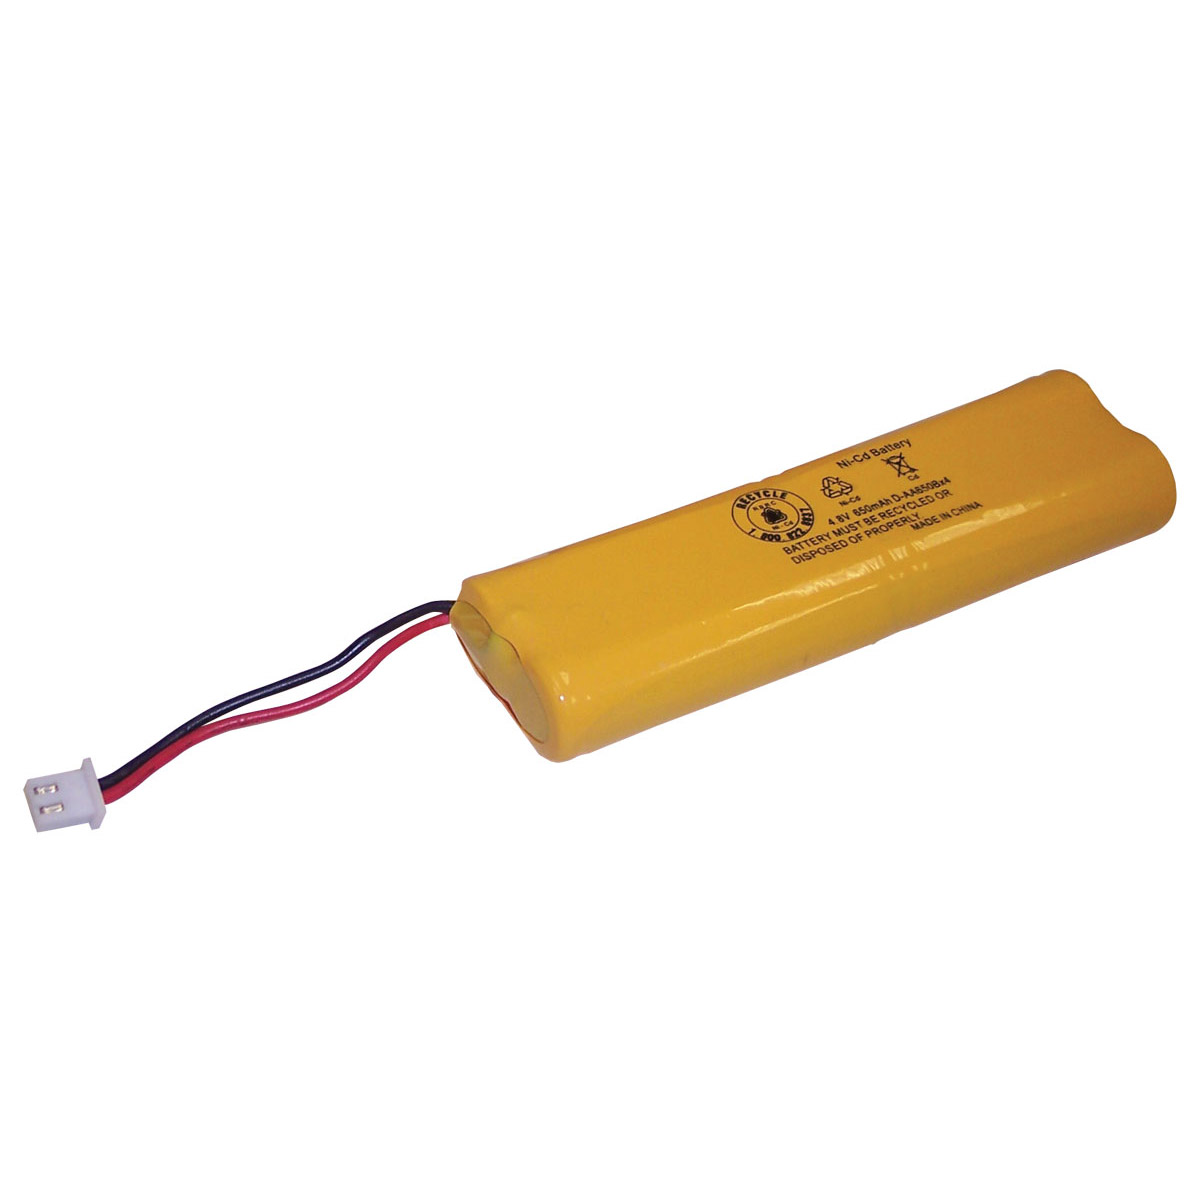 Picture of Nora Lighting NEB-NICAD6 2.4V 300mAh NiCAD Replacement Battery, Red